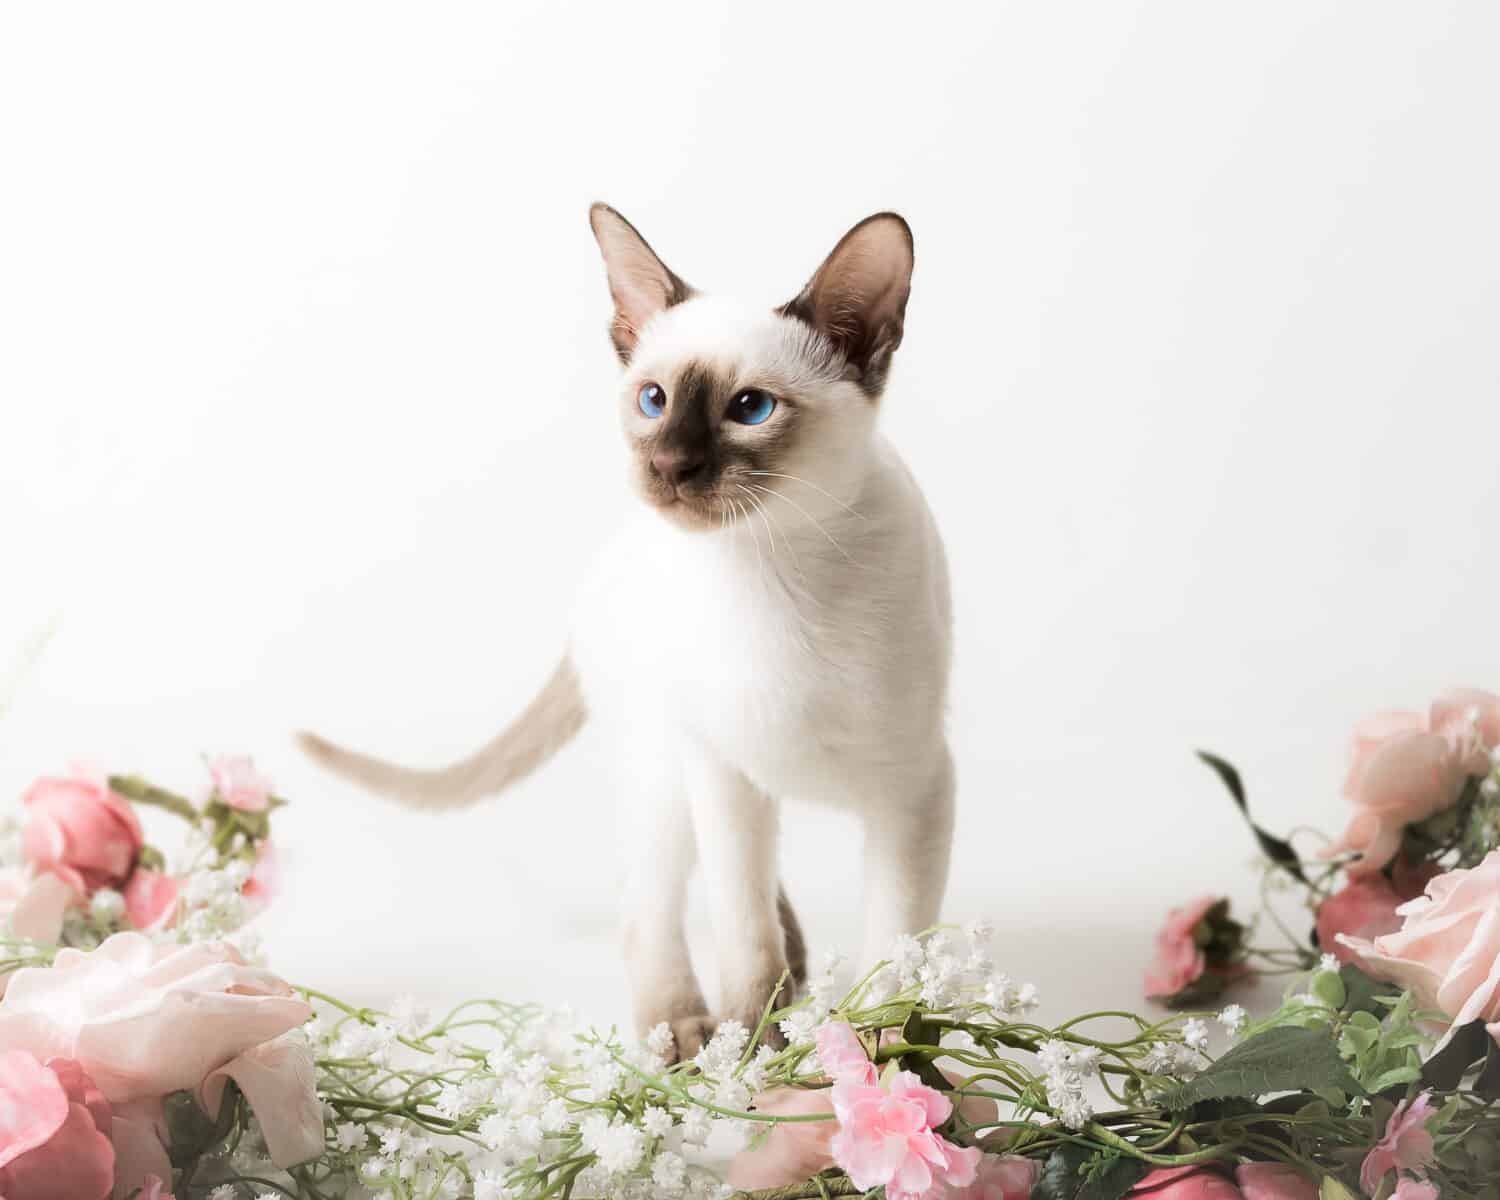 Chocolate point siamese kitten and flowers